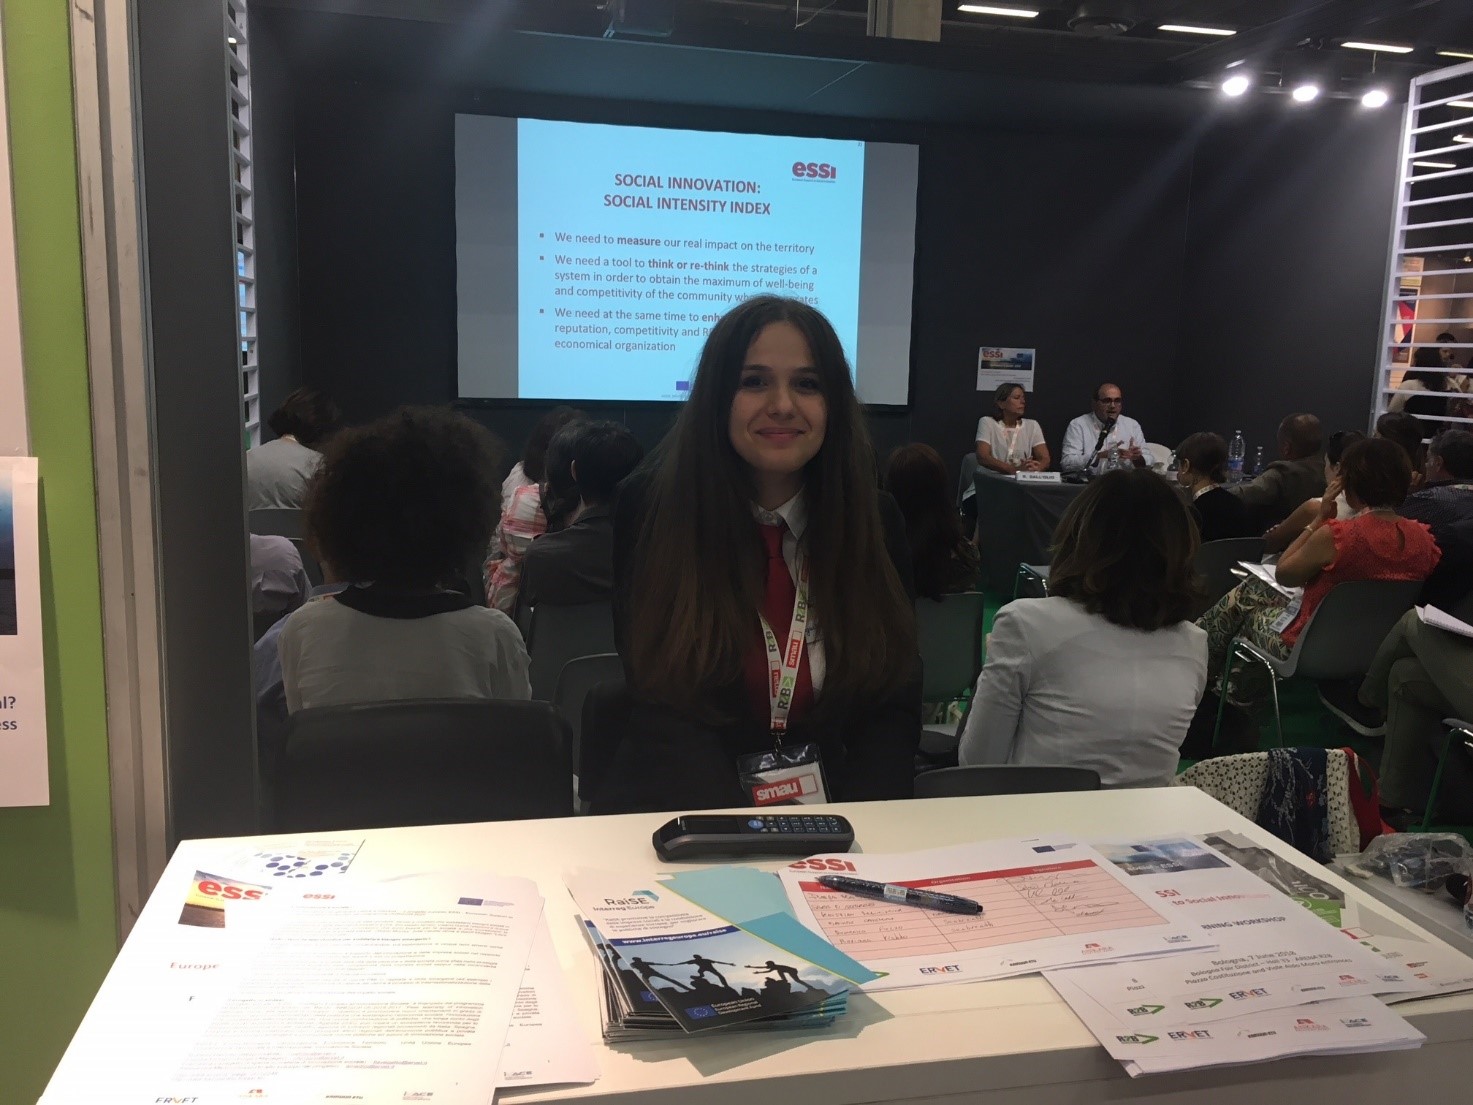 RaiSE at R2B (Research to Business) 2018 in Bologna